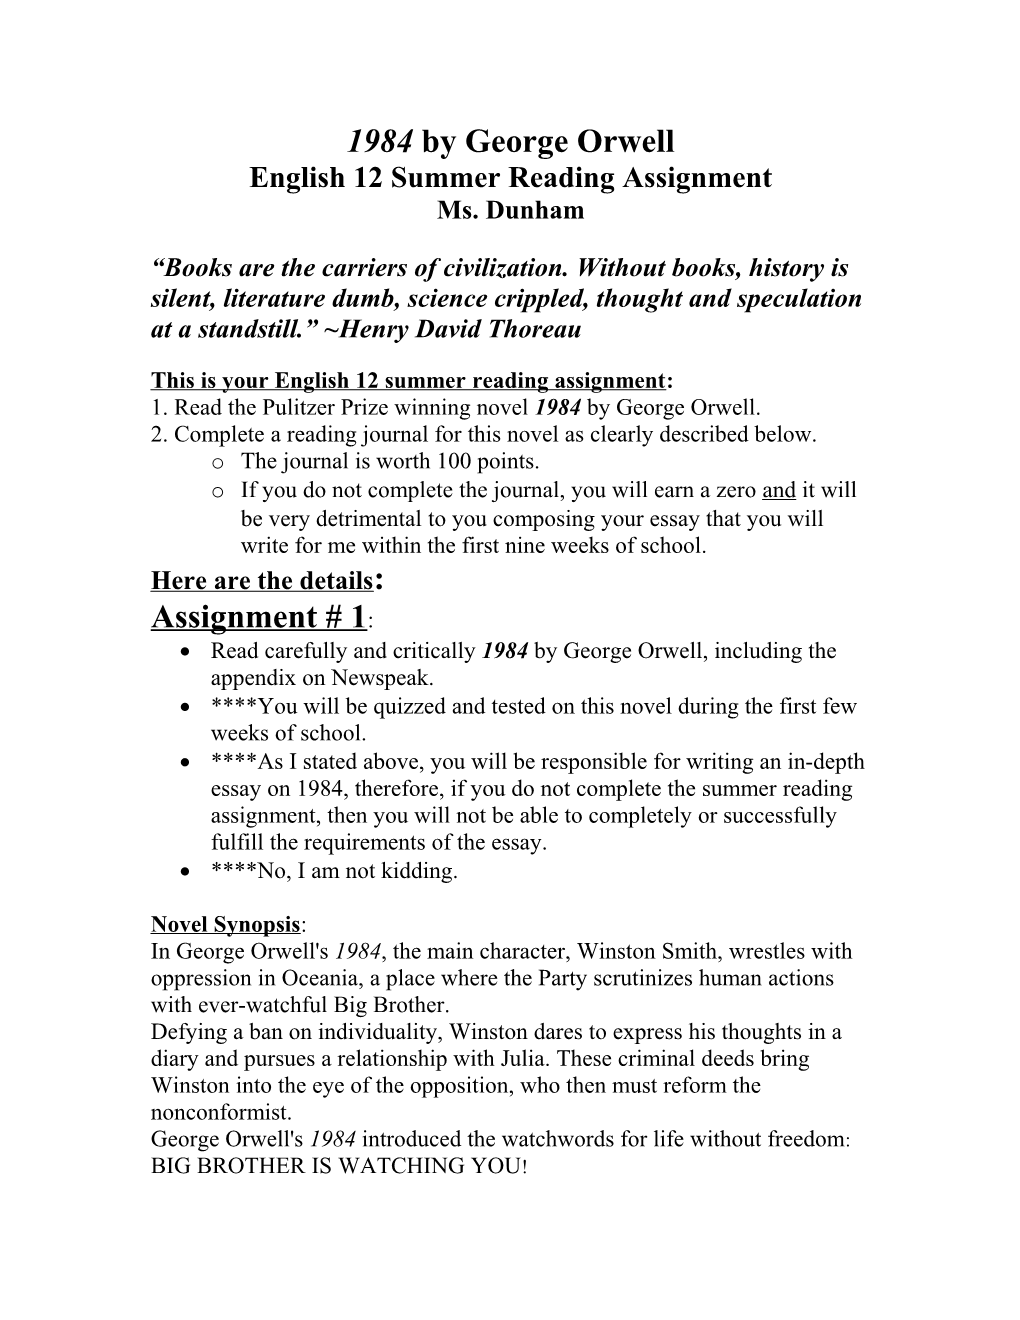 English 12 Summer Reading Assignment